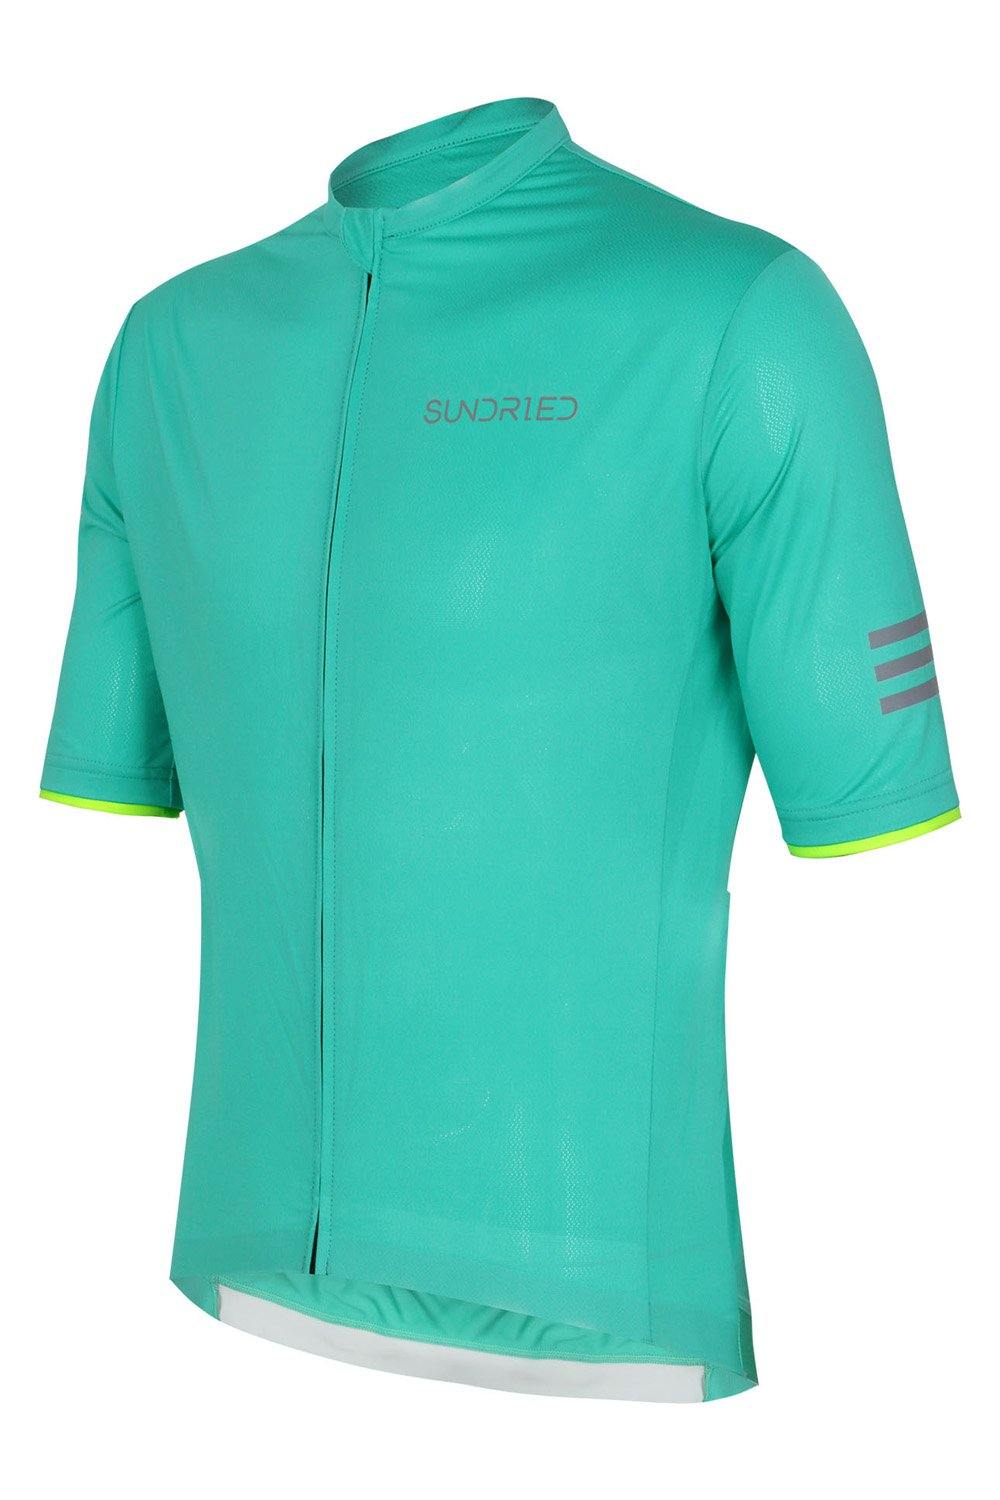 Sundried Apex Men's Short Sleeve Cycle Jersey Short Sleeve Jersey S Turquoise SD0339 S Turquoise Activewear